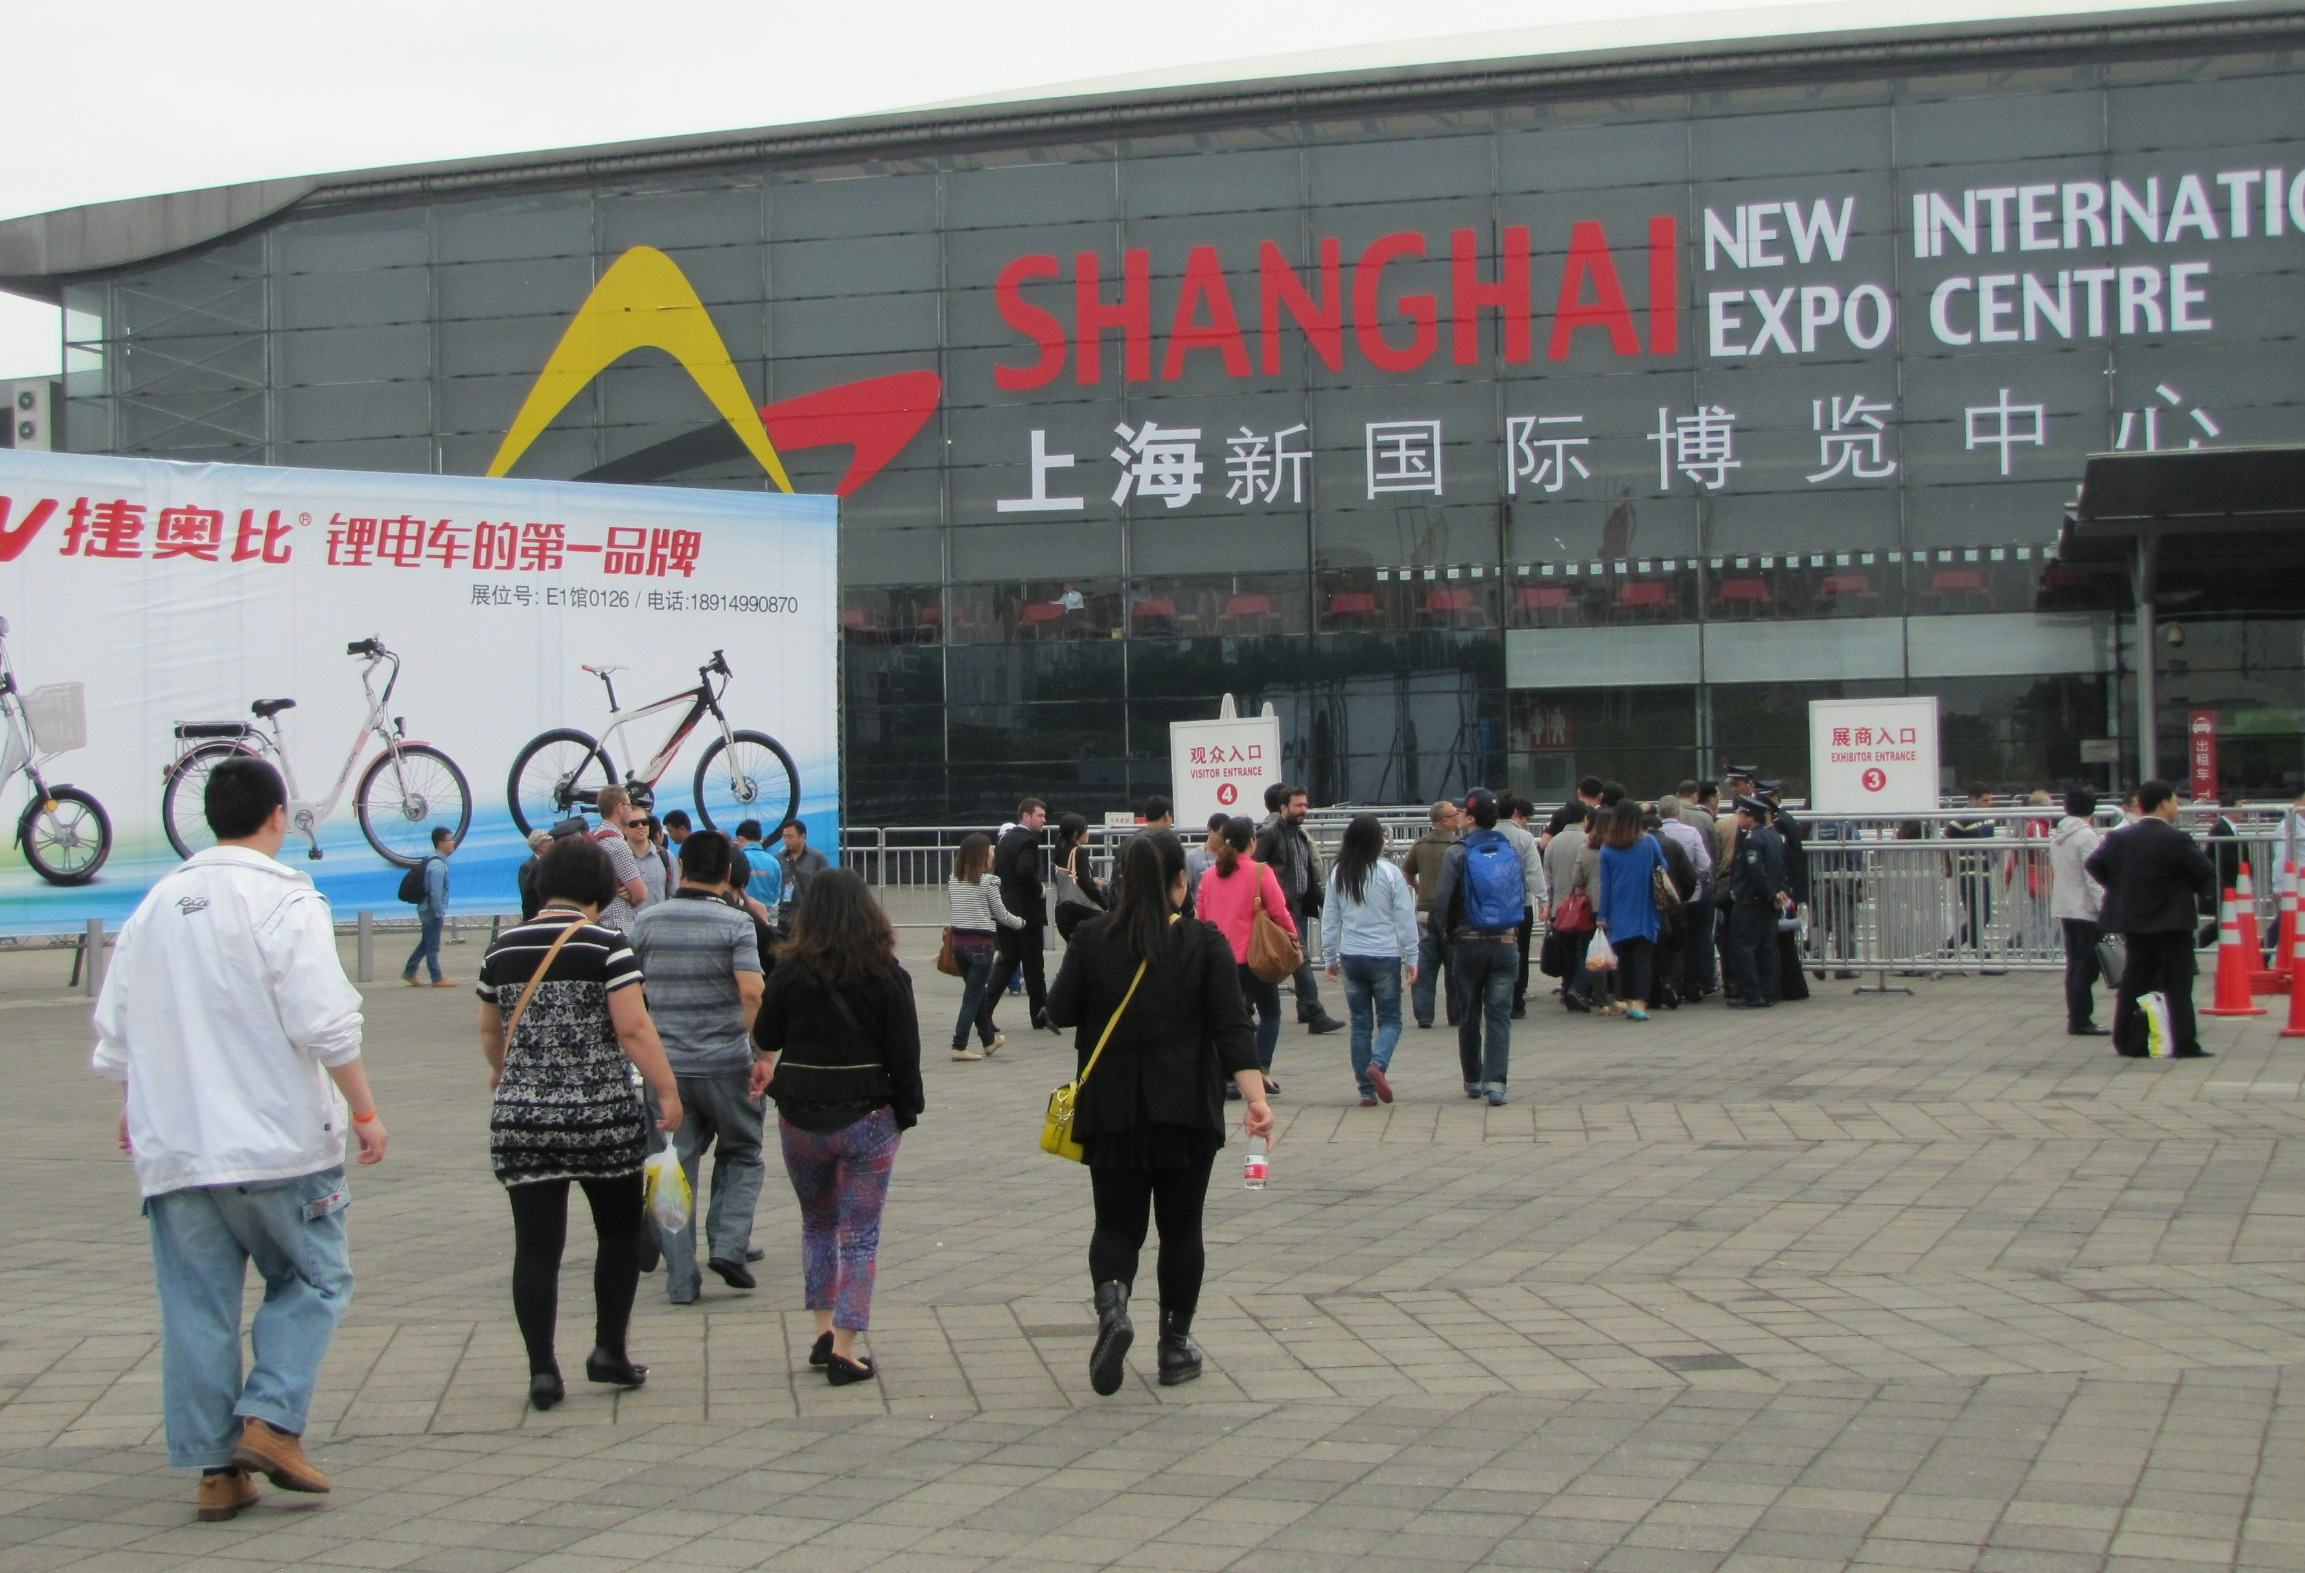 The improvements of the exhibition halls of the Shanghai New International Expo Center (SNIEC) were the main reason to move the event again. – Photo Bike Europe